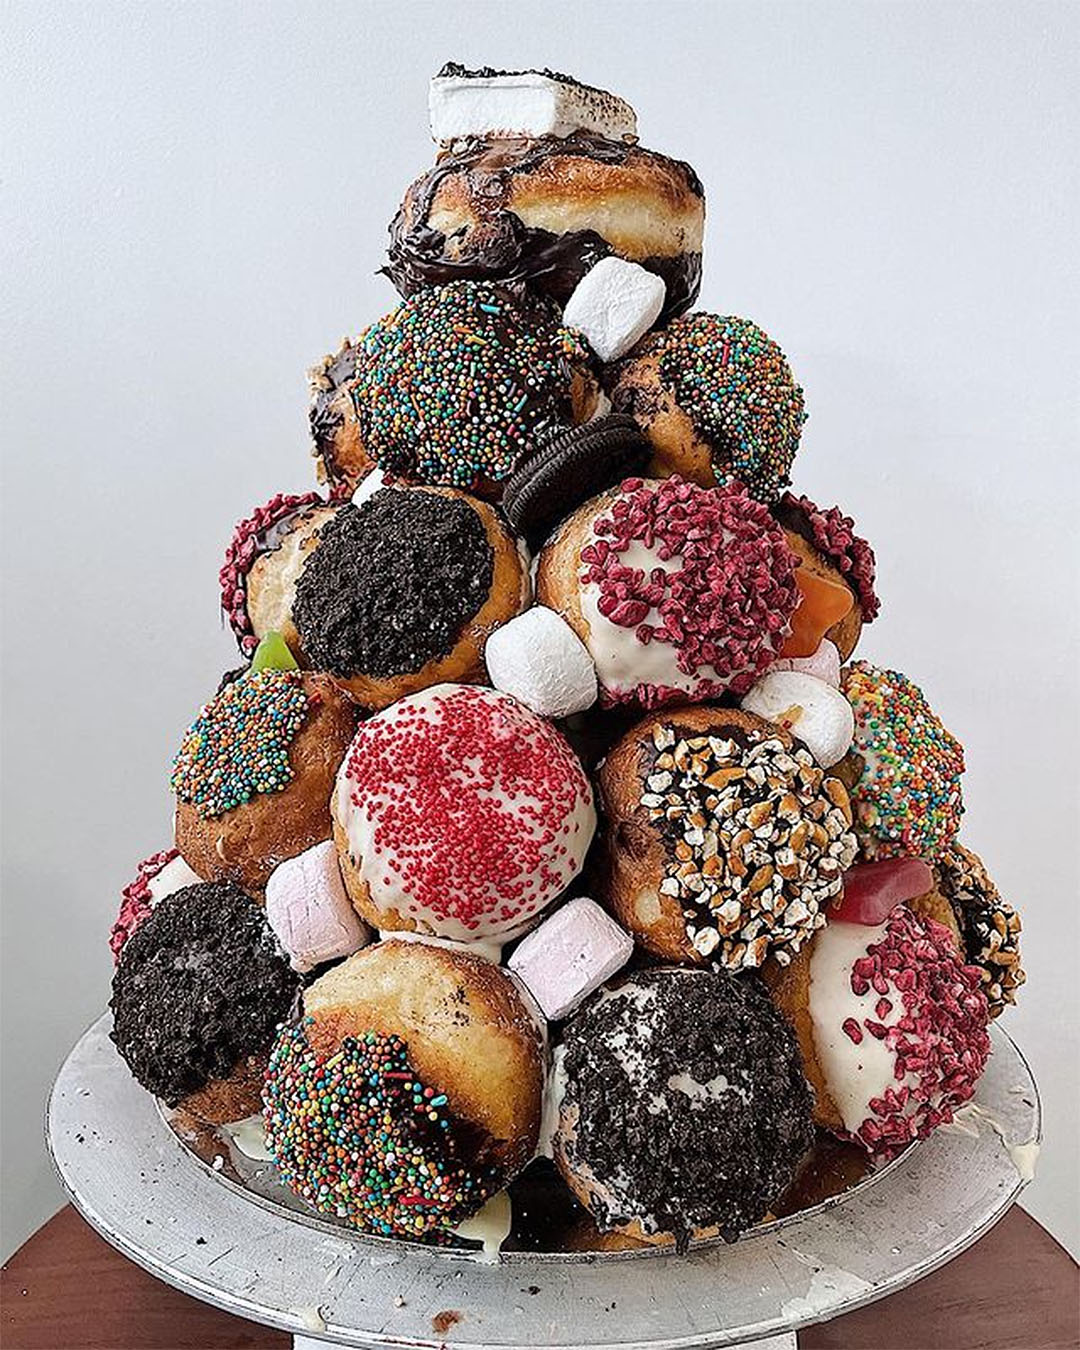 A doughnut tower at The Lunch Room in Onehunga, one of the best doughnuts in Auckland.